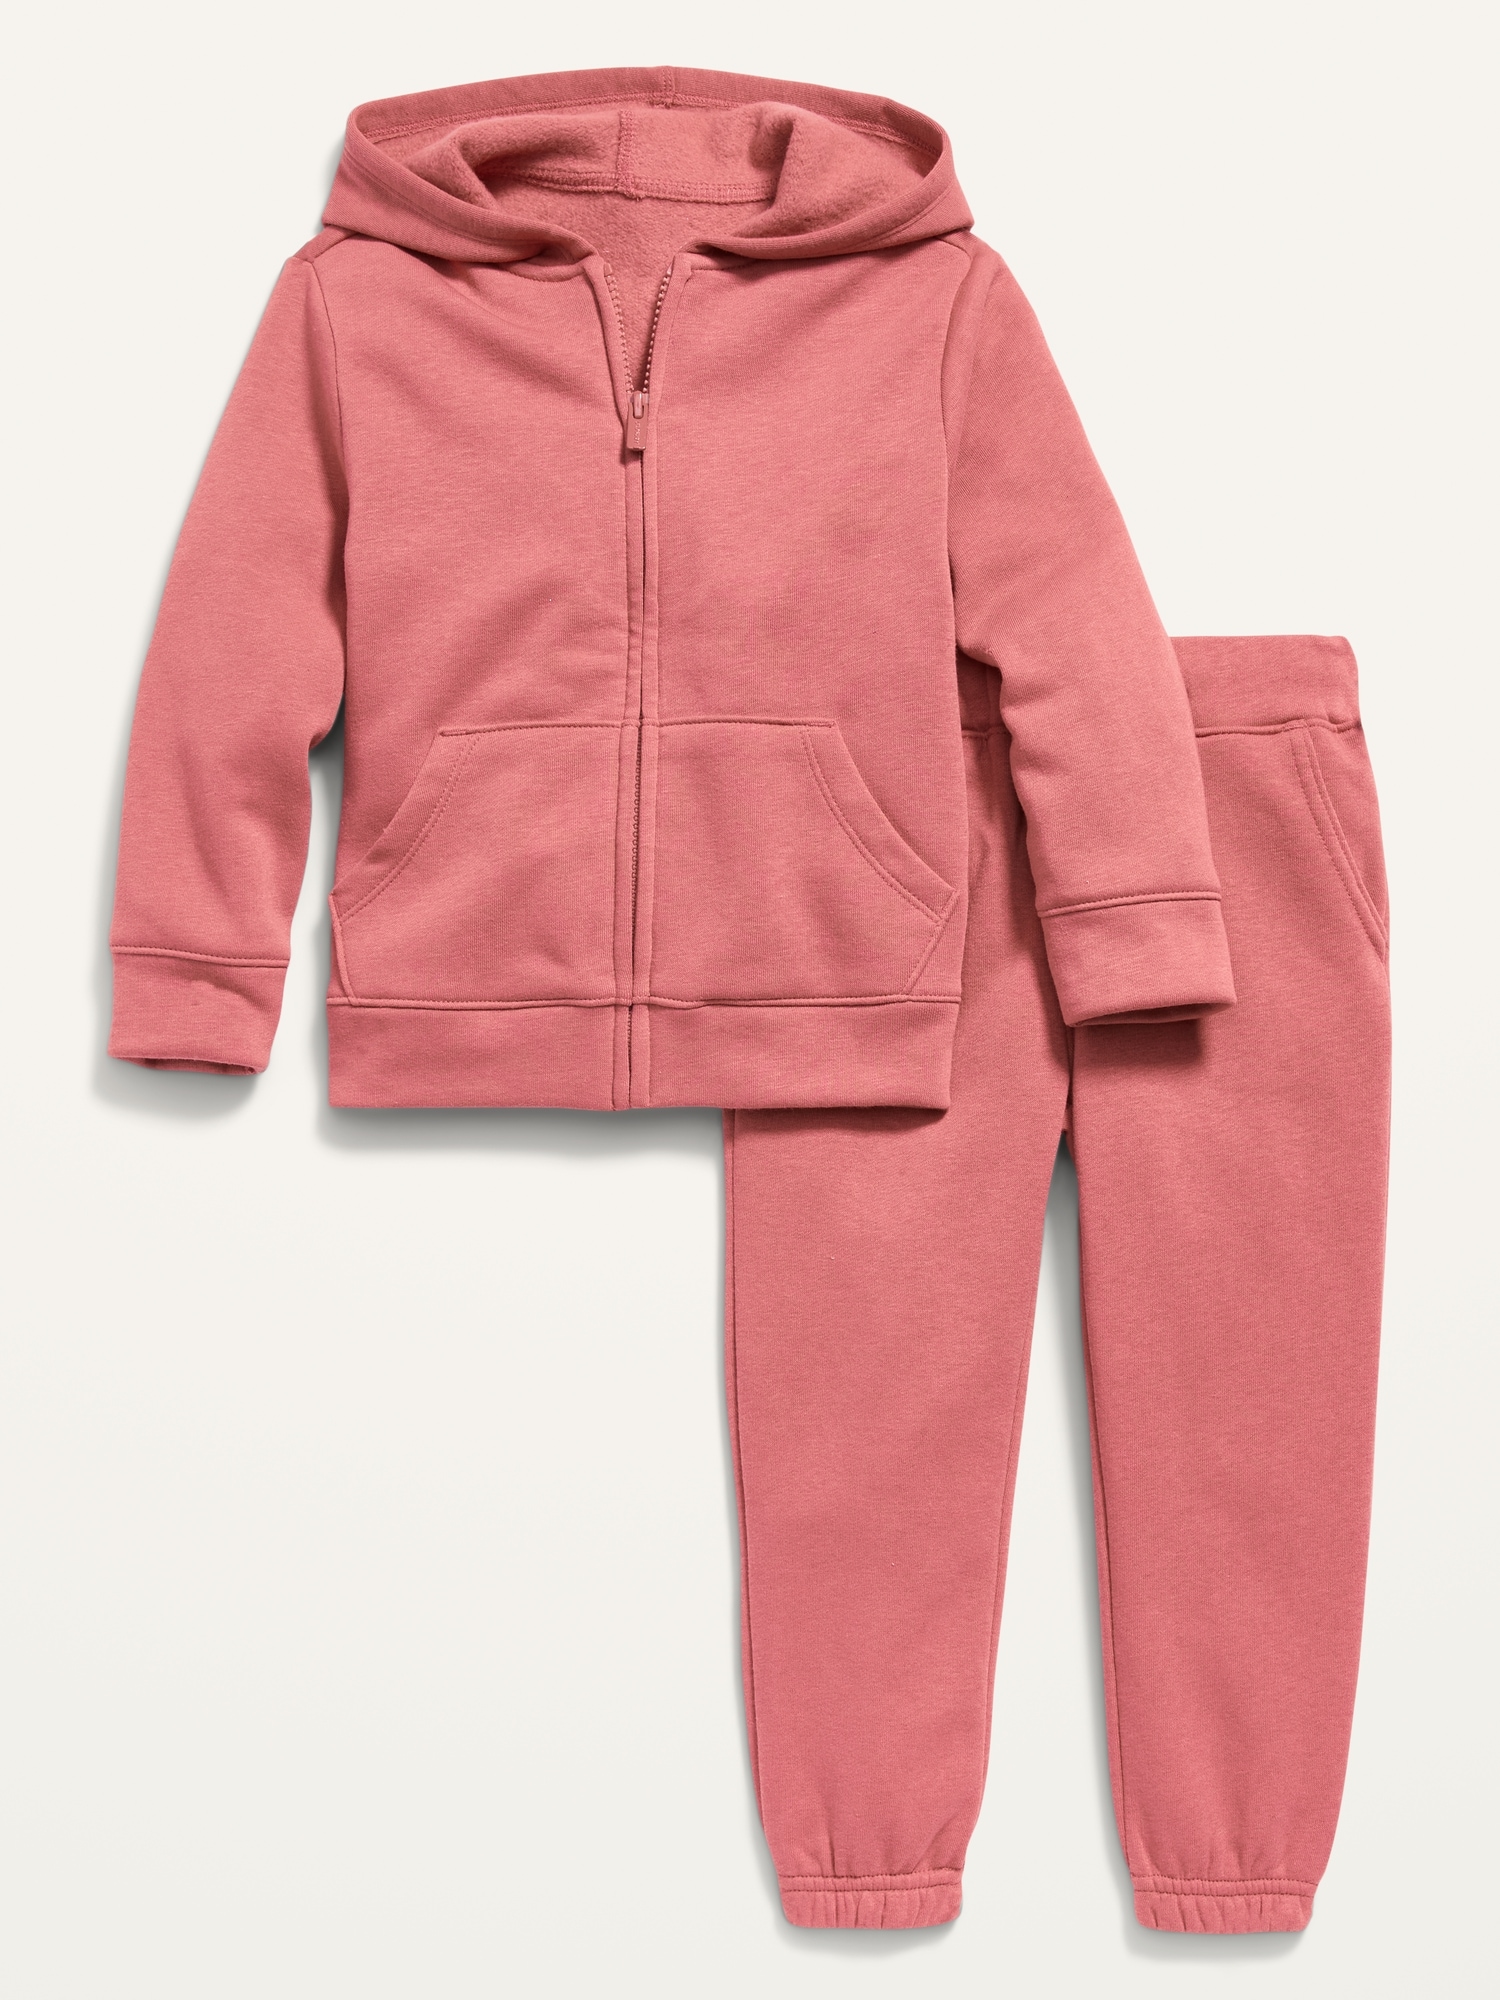 Old Navy Unisex Zip Hoodie and Functional Drawstring Jogger Sweatpants Set for Toddler red. 1